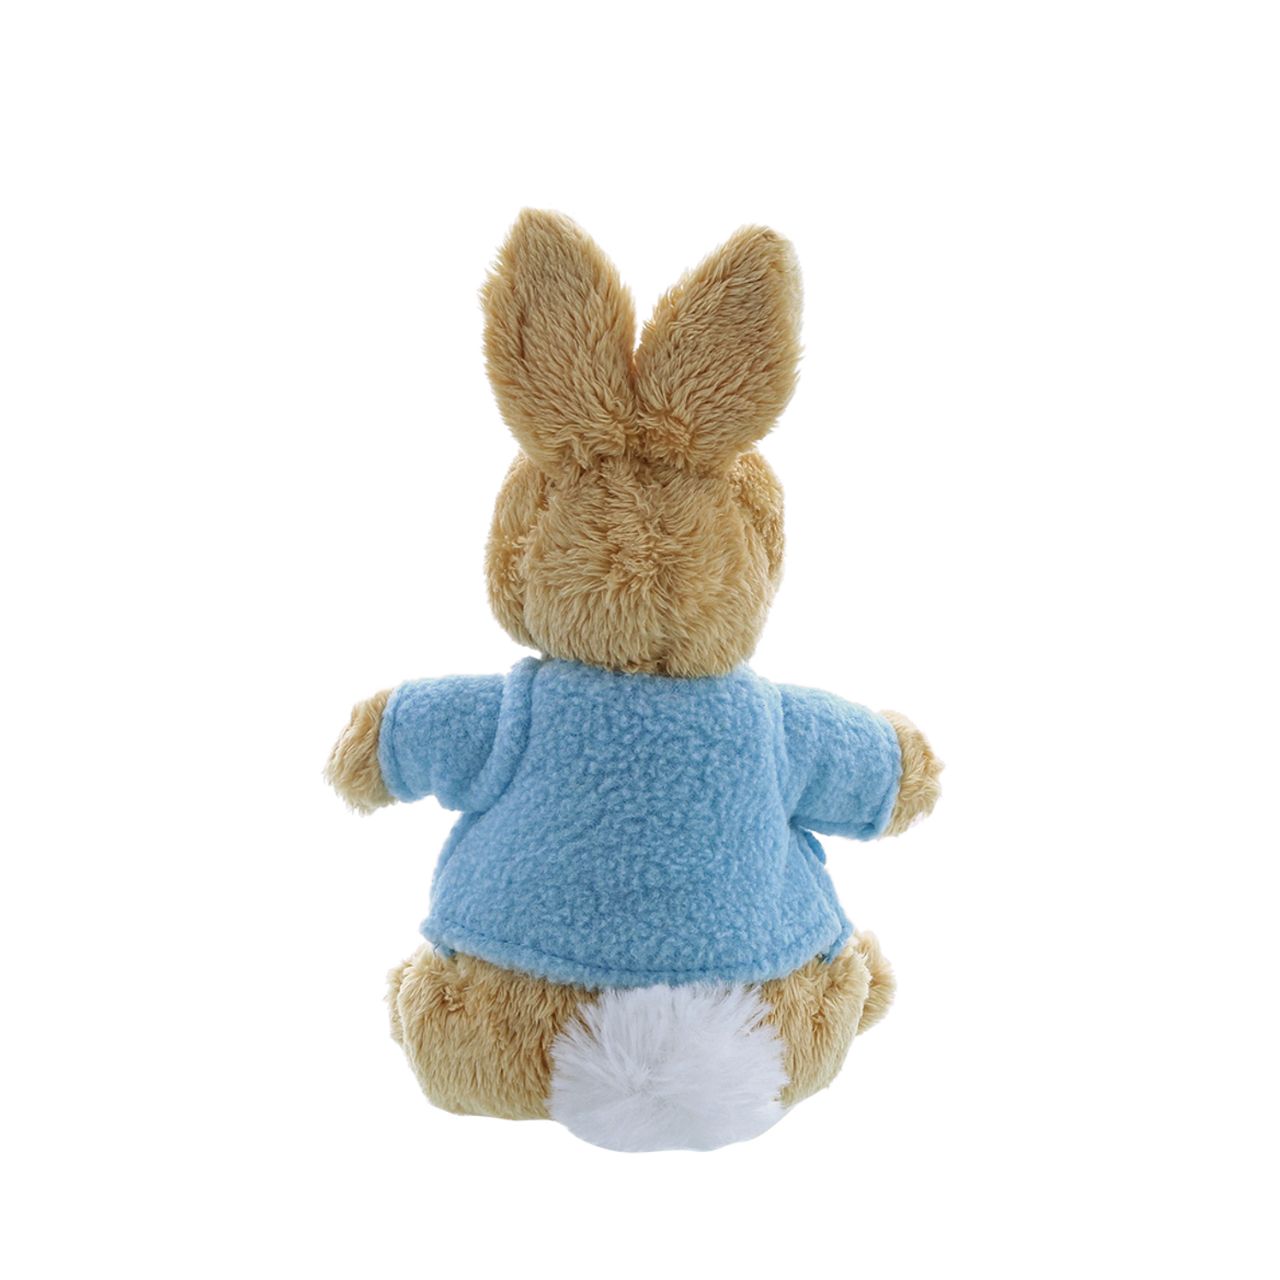 Beatrix Potter Peter Rabbit Small  This Peter Rabbit soft toy is made from beautifully soft fabric and is dressed in clothing exactly as illustrated by Beatrix Potter, with his signature blue jacket. The Peter Rabbit collection features the much loved characters from the Beatrix Potter books and this quality and authentic soft toy is sure to be adored for many years to come.